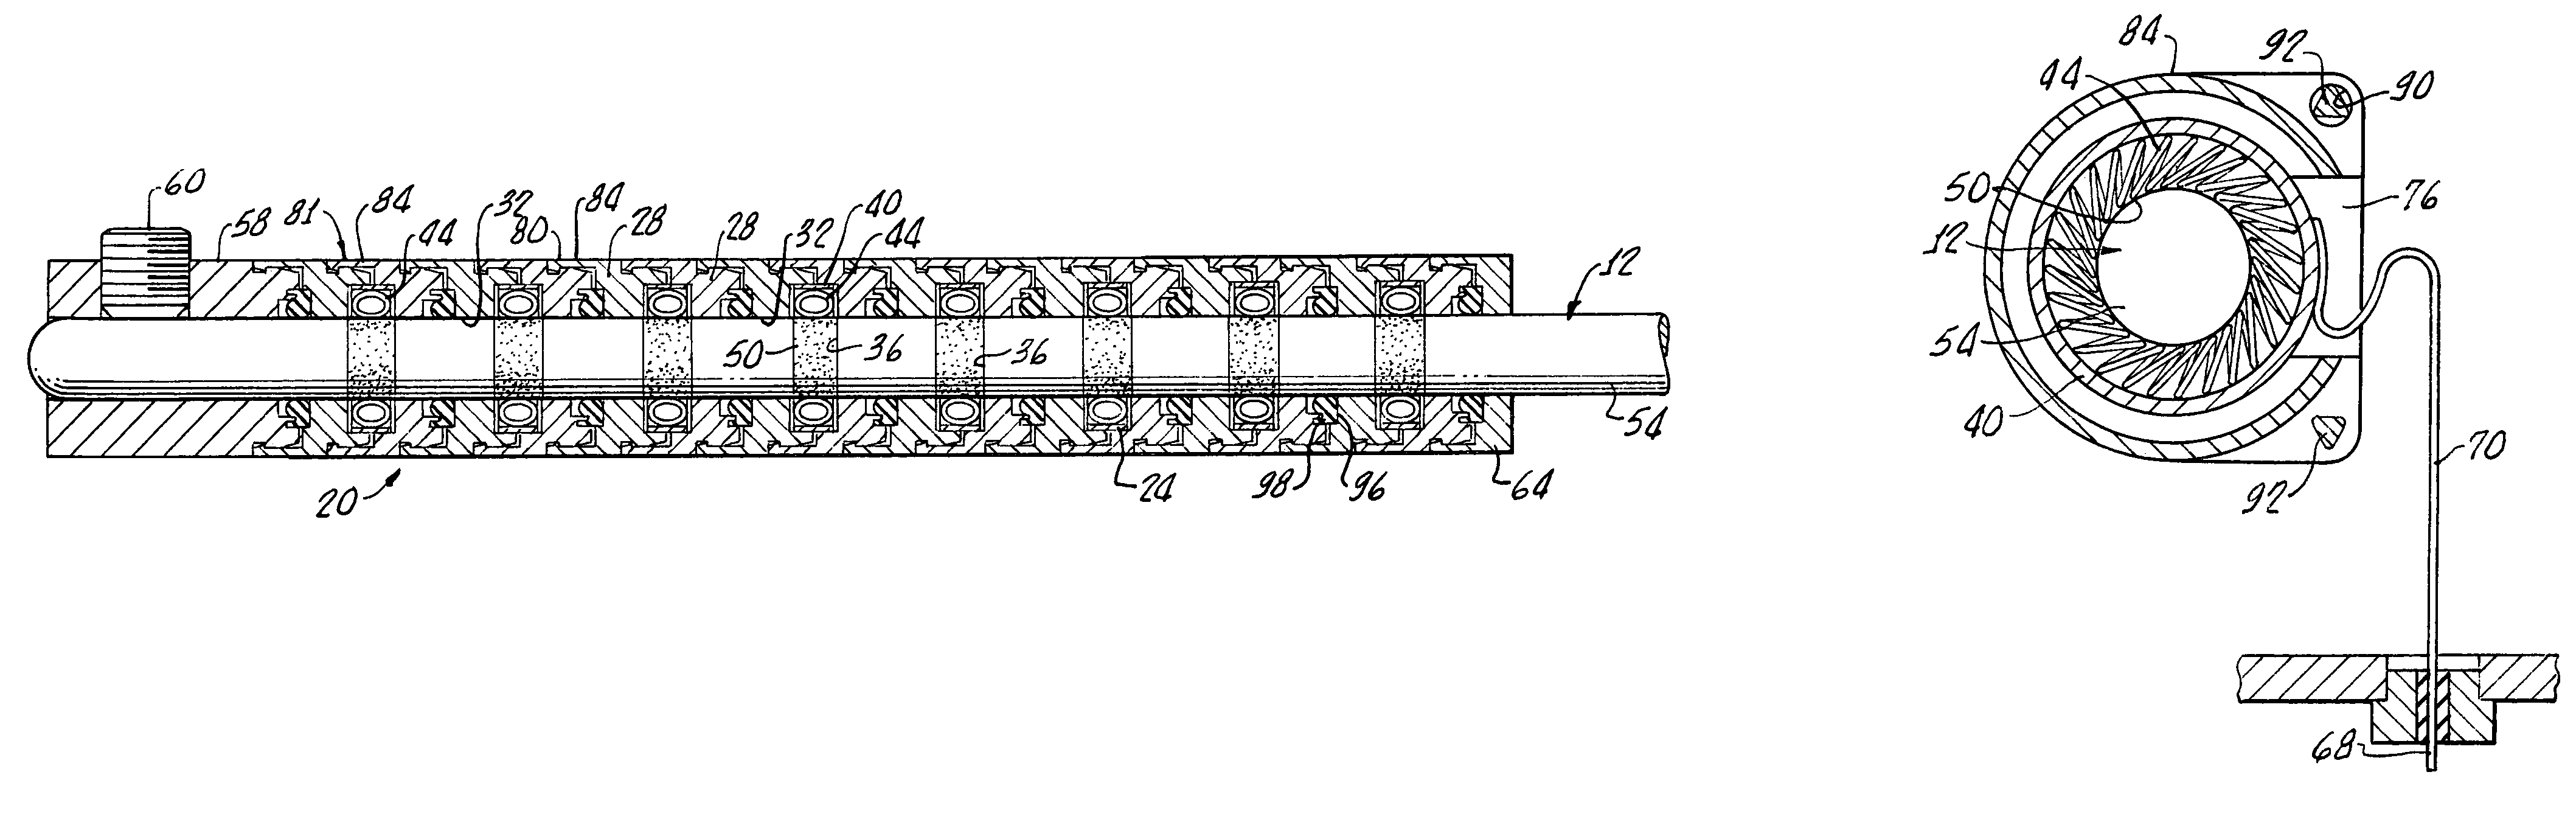 Electrical conductive path for a medical electronics device